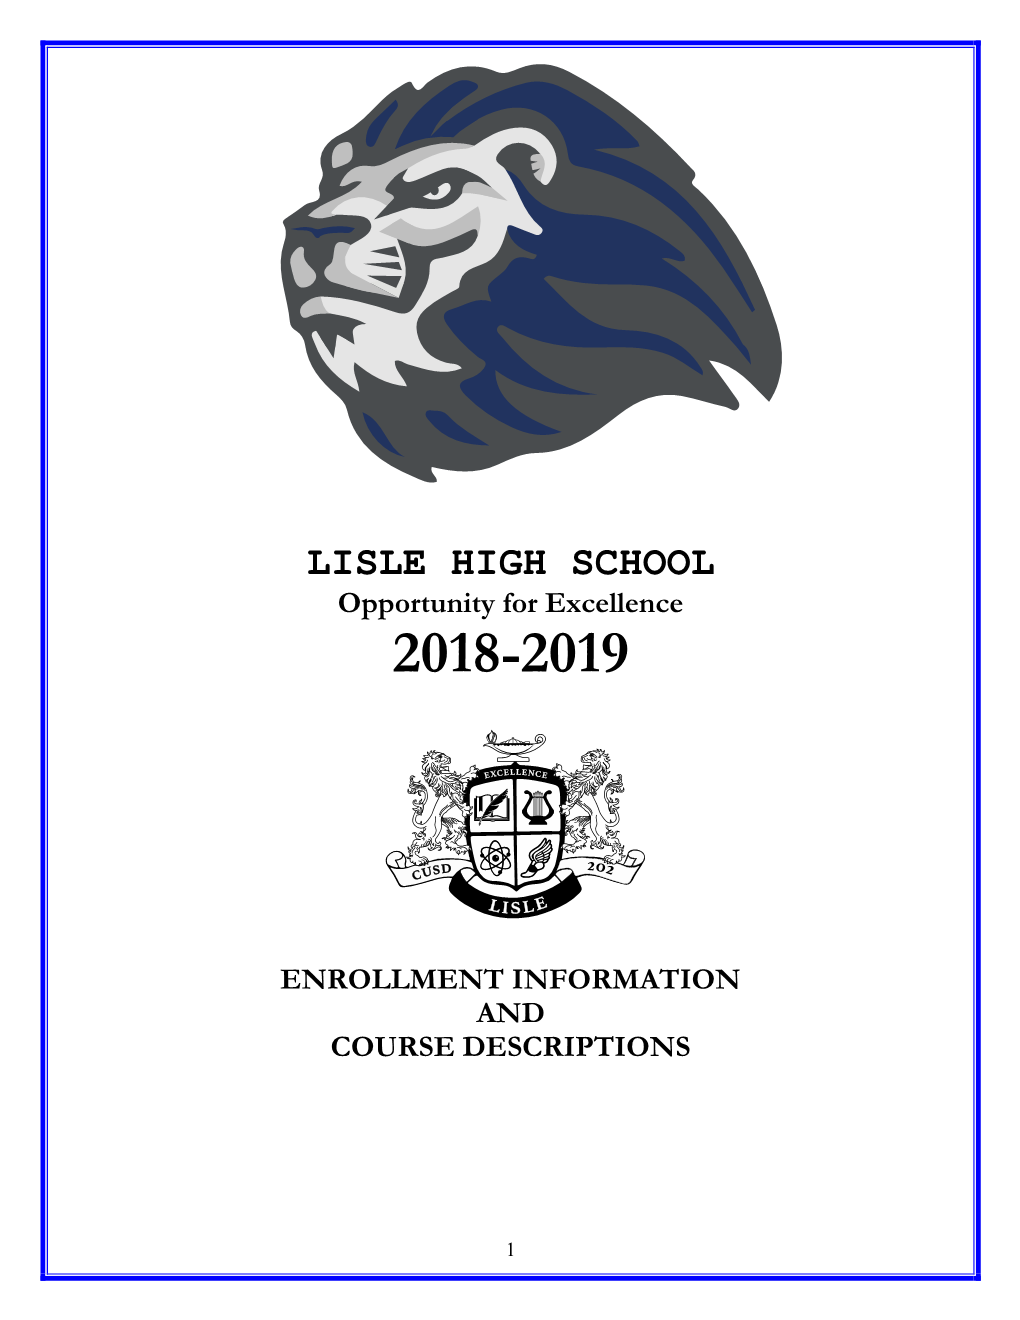 LISLE HIGH SCHOOL Opportunity for Excellence 2018-2019